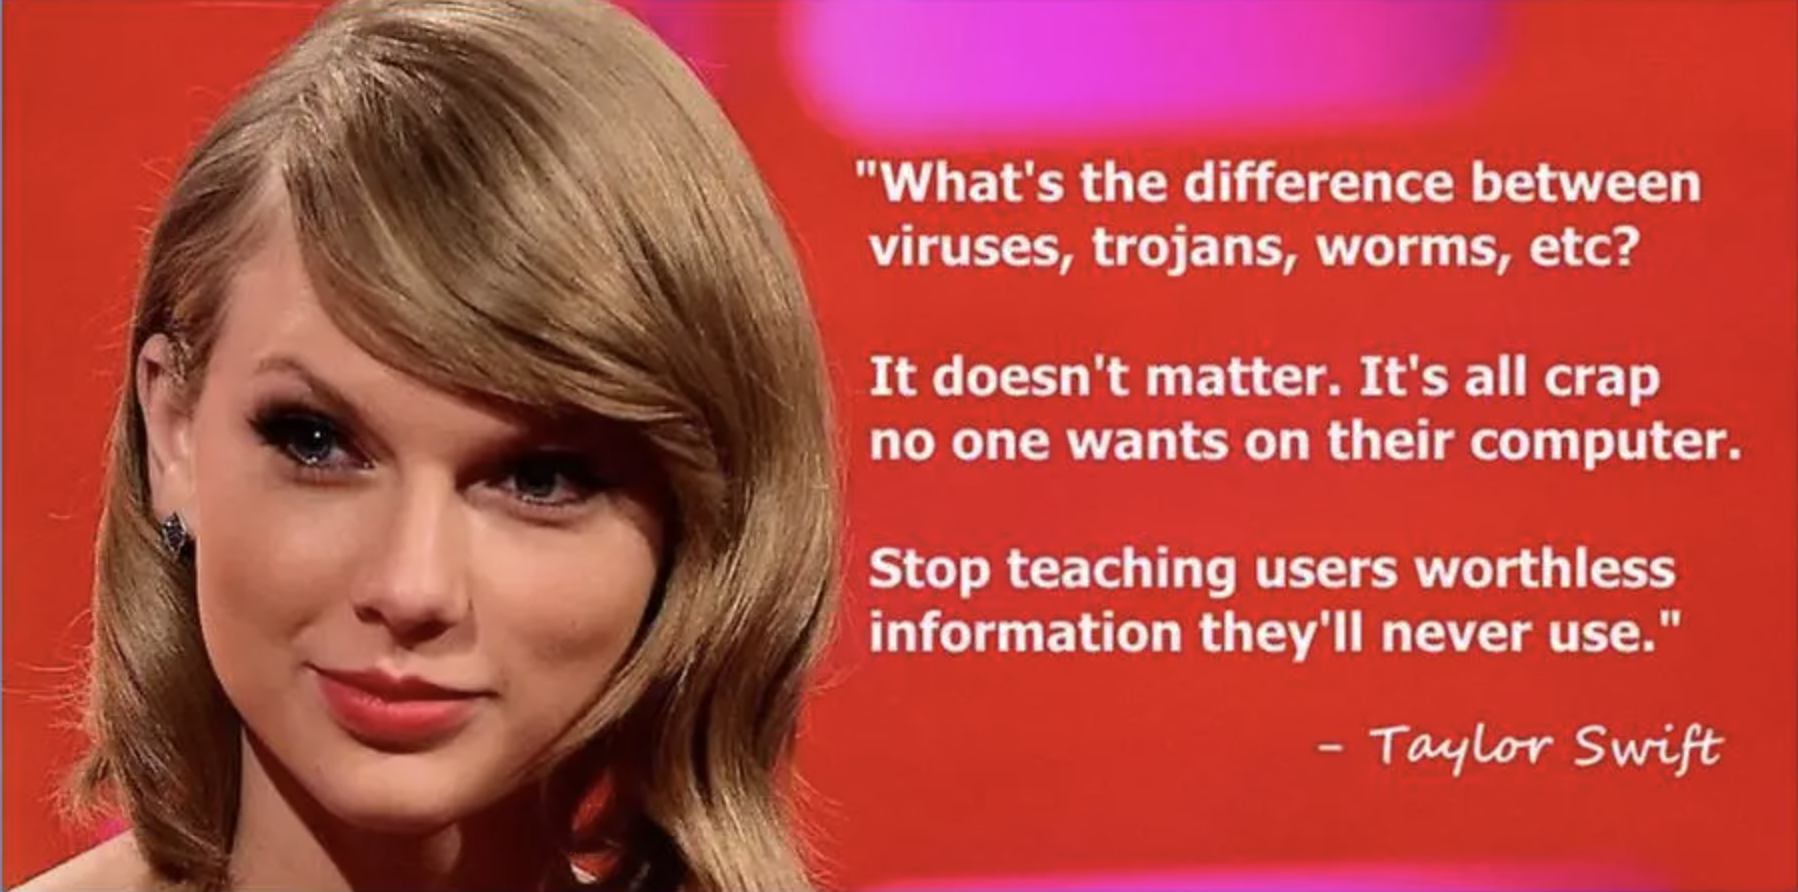 What's the difference between viruses, trojans, worms, etc? It doesn't matter. It's all crap no one wants on their computer. Stop teaching users worthless information that they'll never use. Taylor Swift